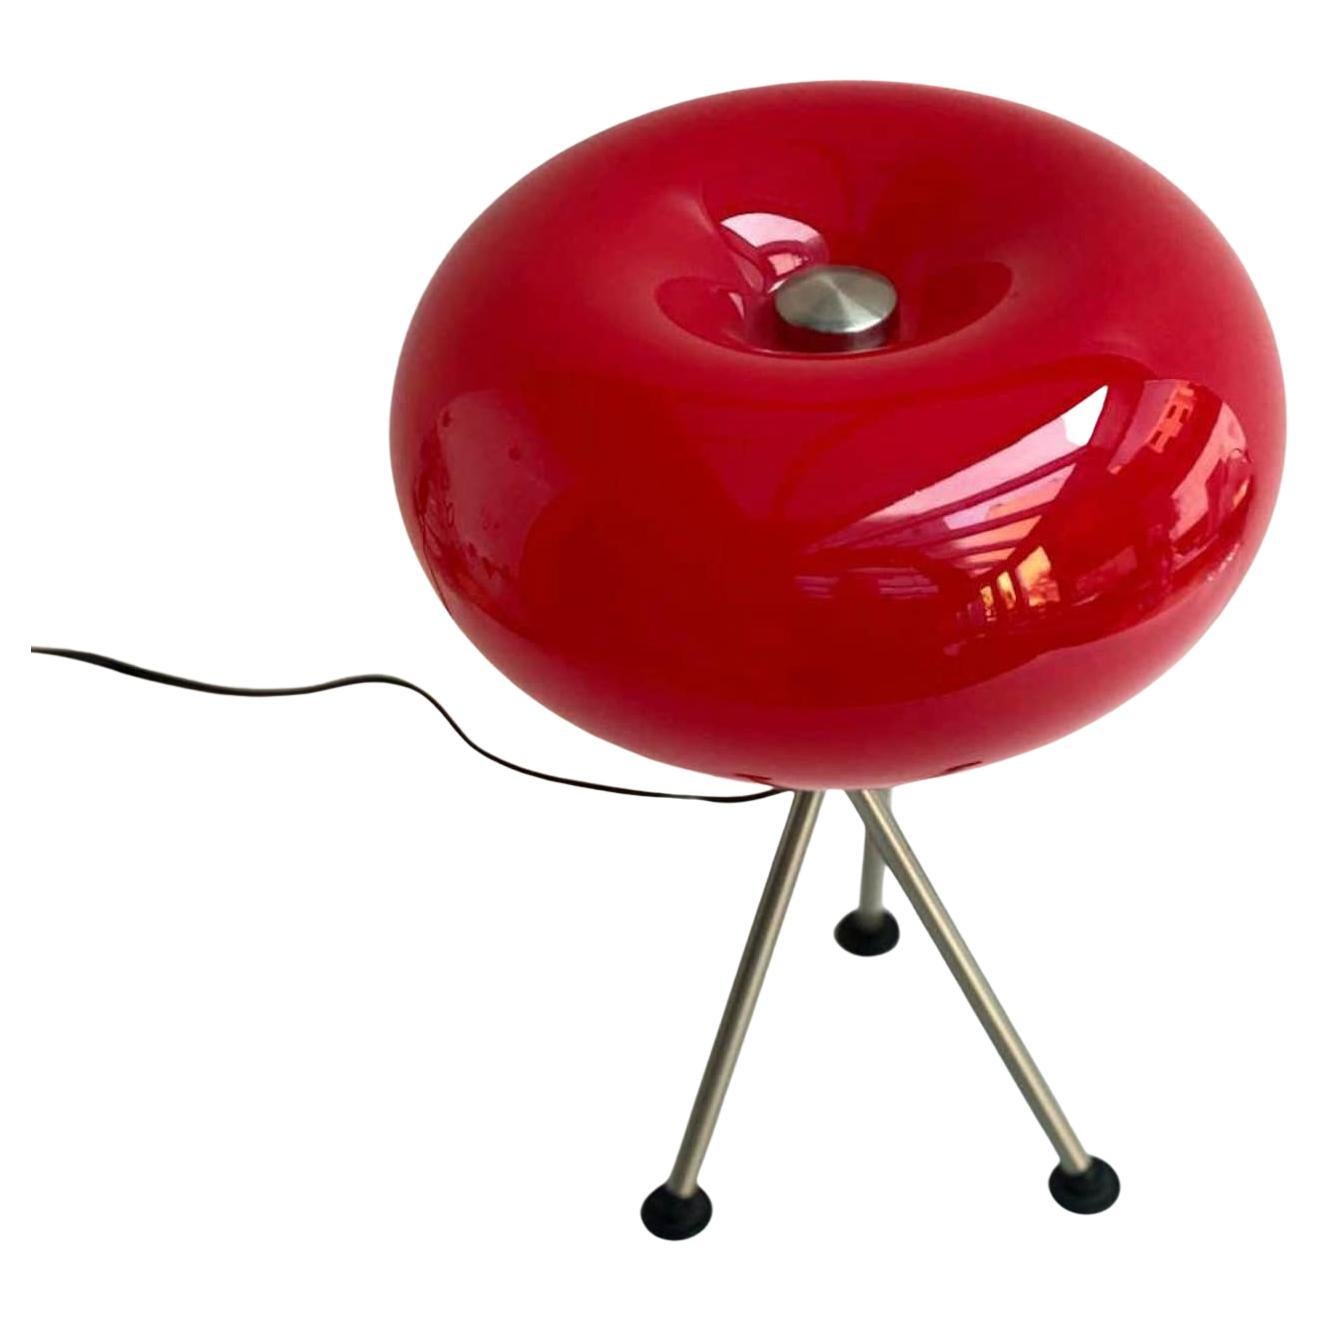 Vintage red table lamp. 

Germany, 1970s. 

Chromed metal tripod base made of 3 rods with plastic revolving caps. Chrome round plate with air-holes. Round UFO style red oval glass globe lampshade with a chrome round cap.

The design of the